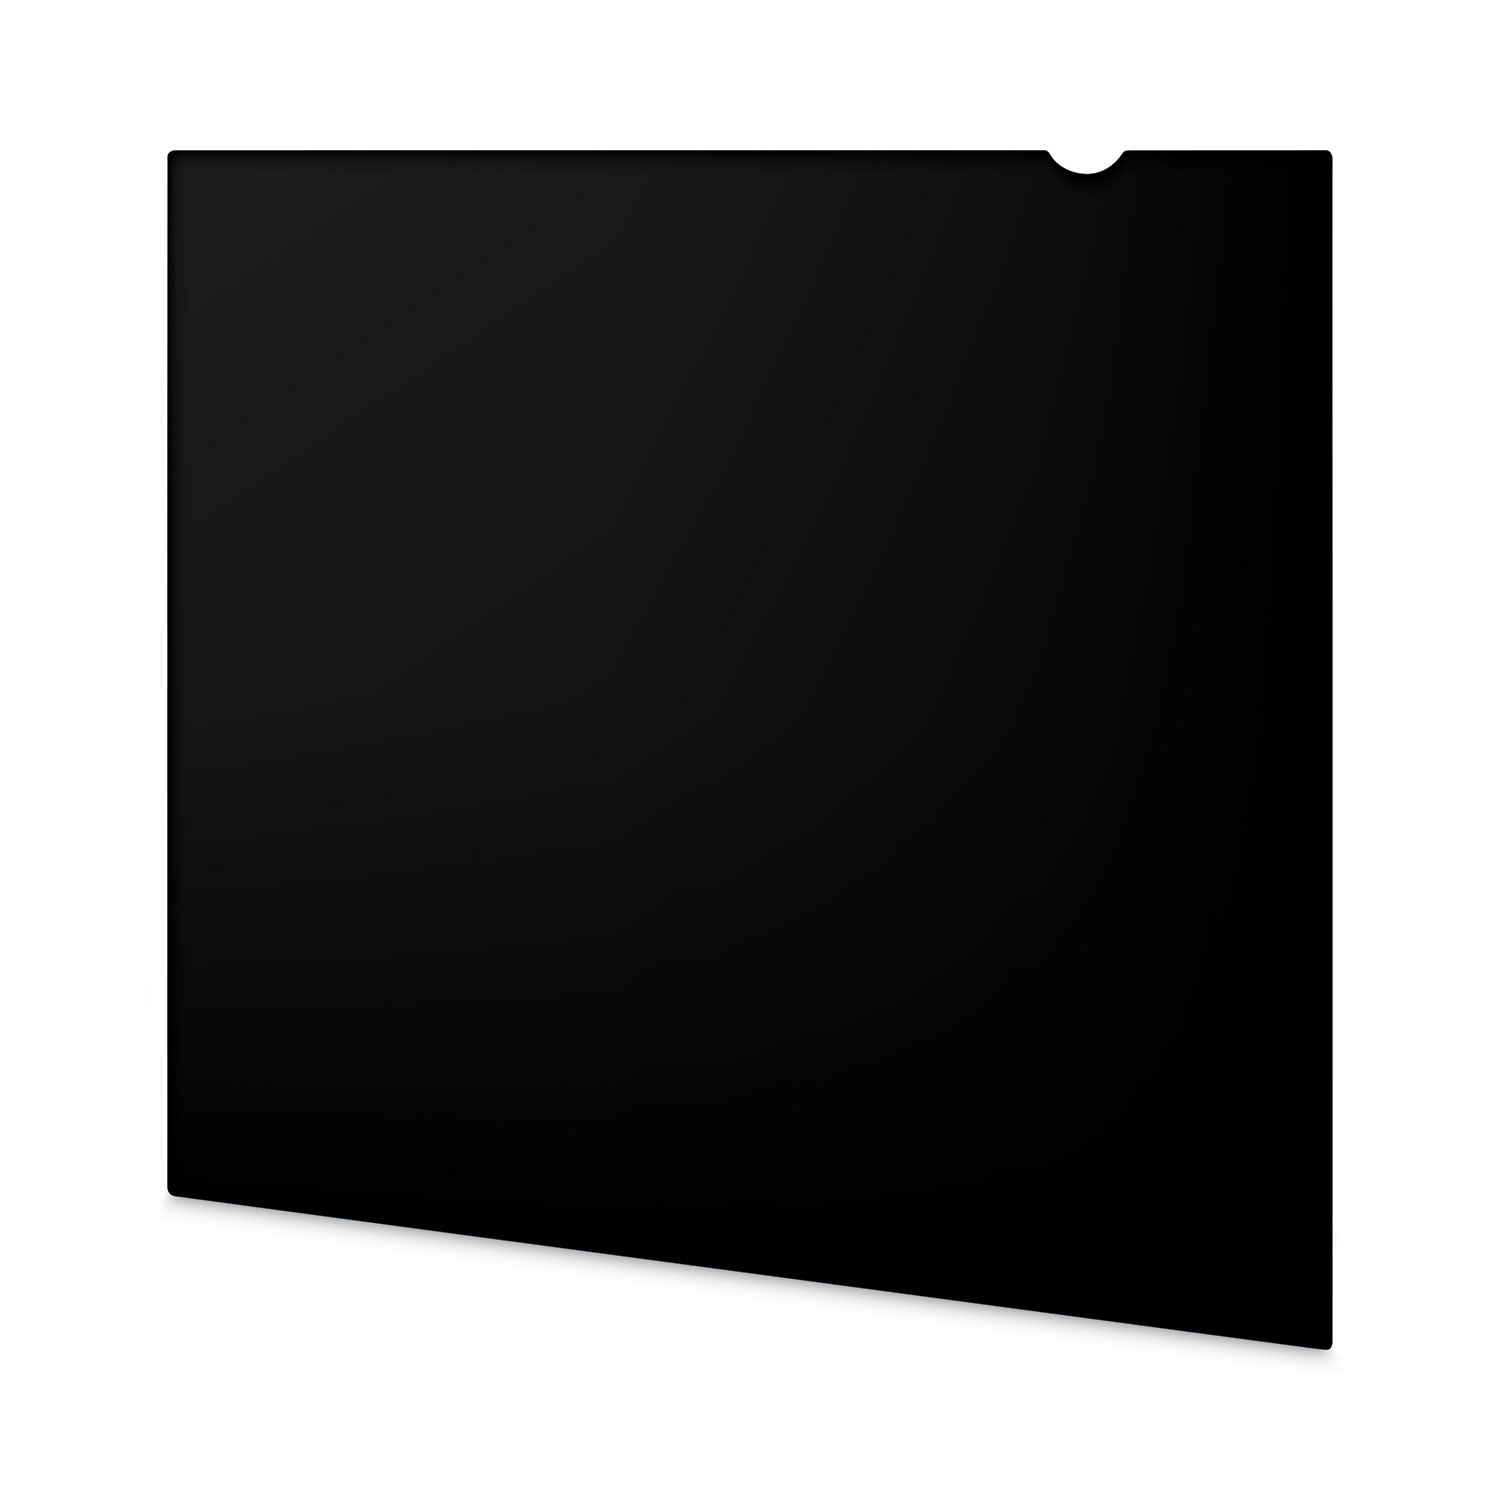 Blackout Privacy Filter for 22" Widescreen Flat Panel Monitor, 16:10 Aspect Ratio - 